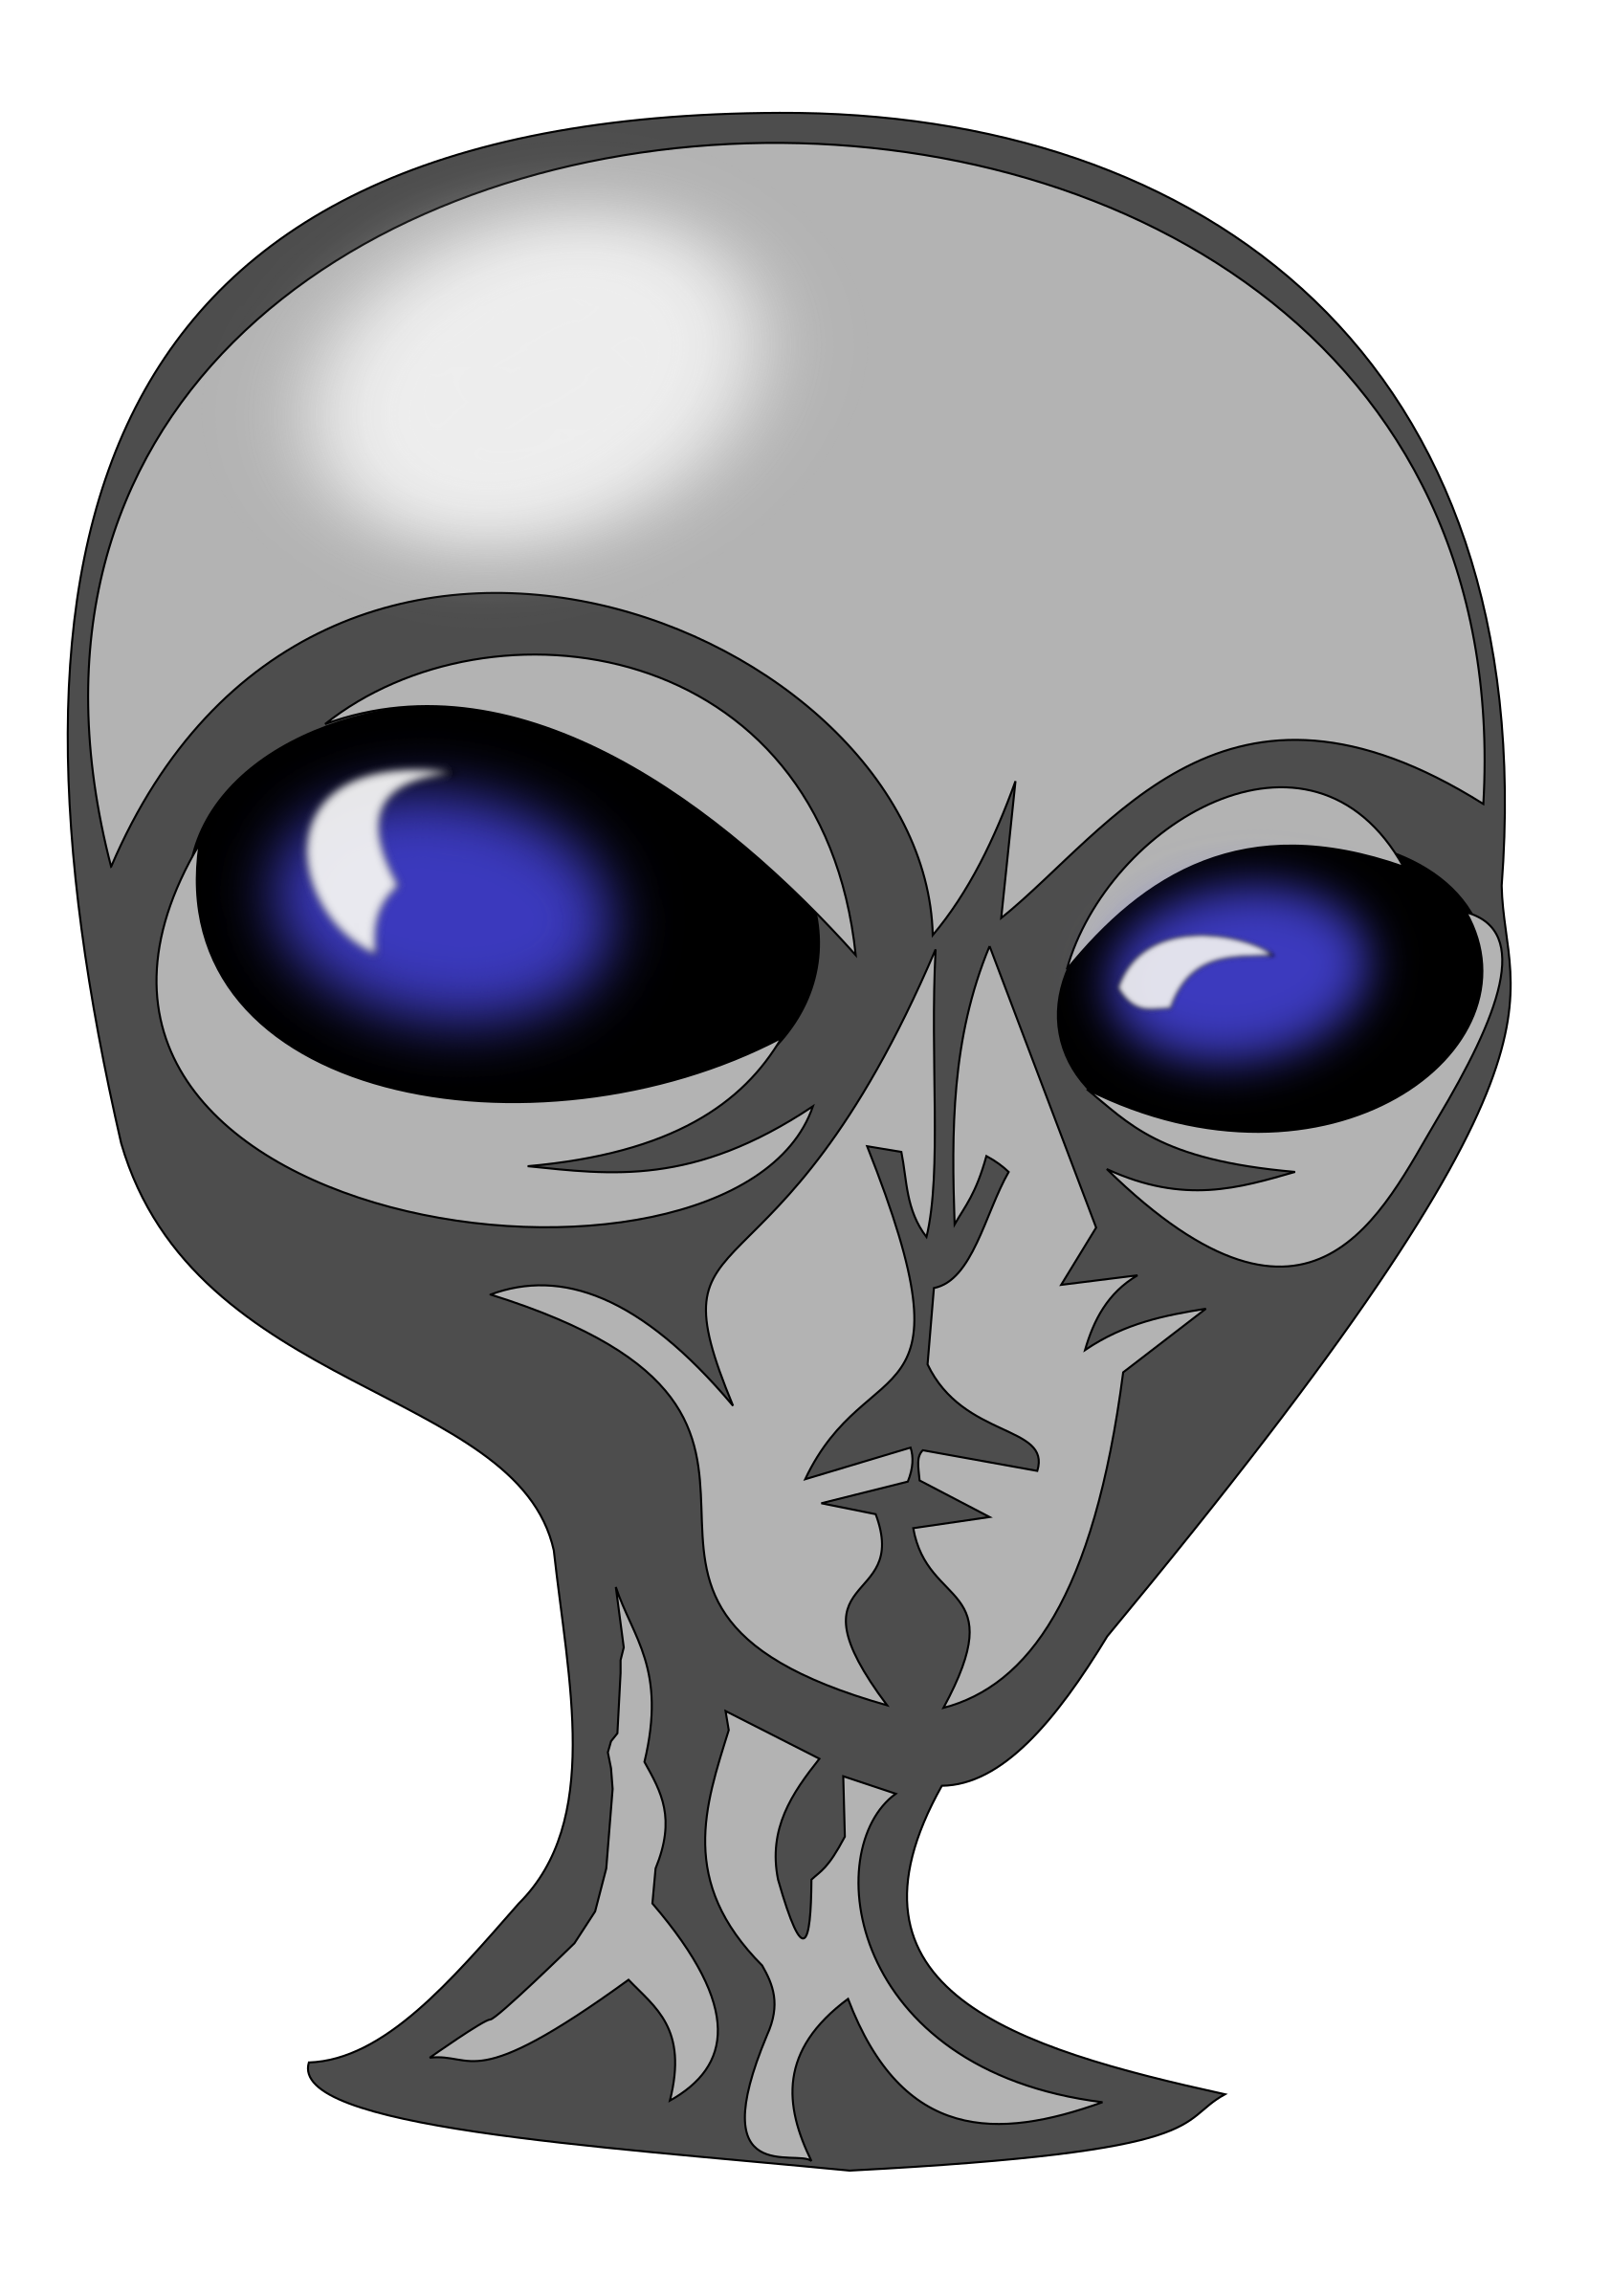 PNG File Name: Alien PlusPng.